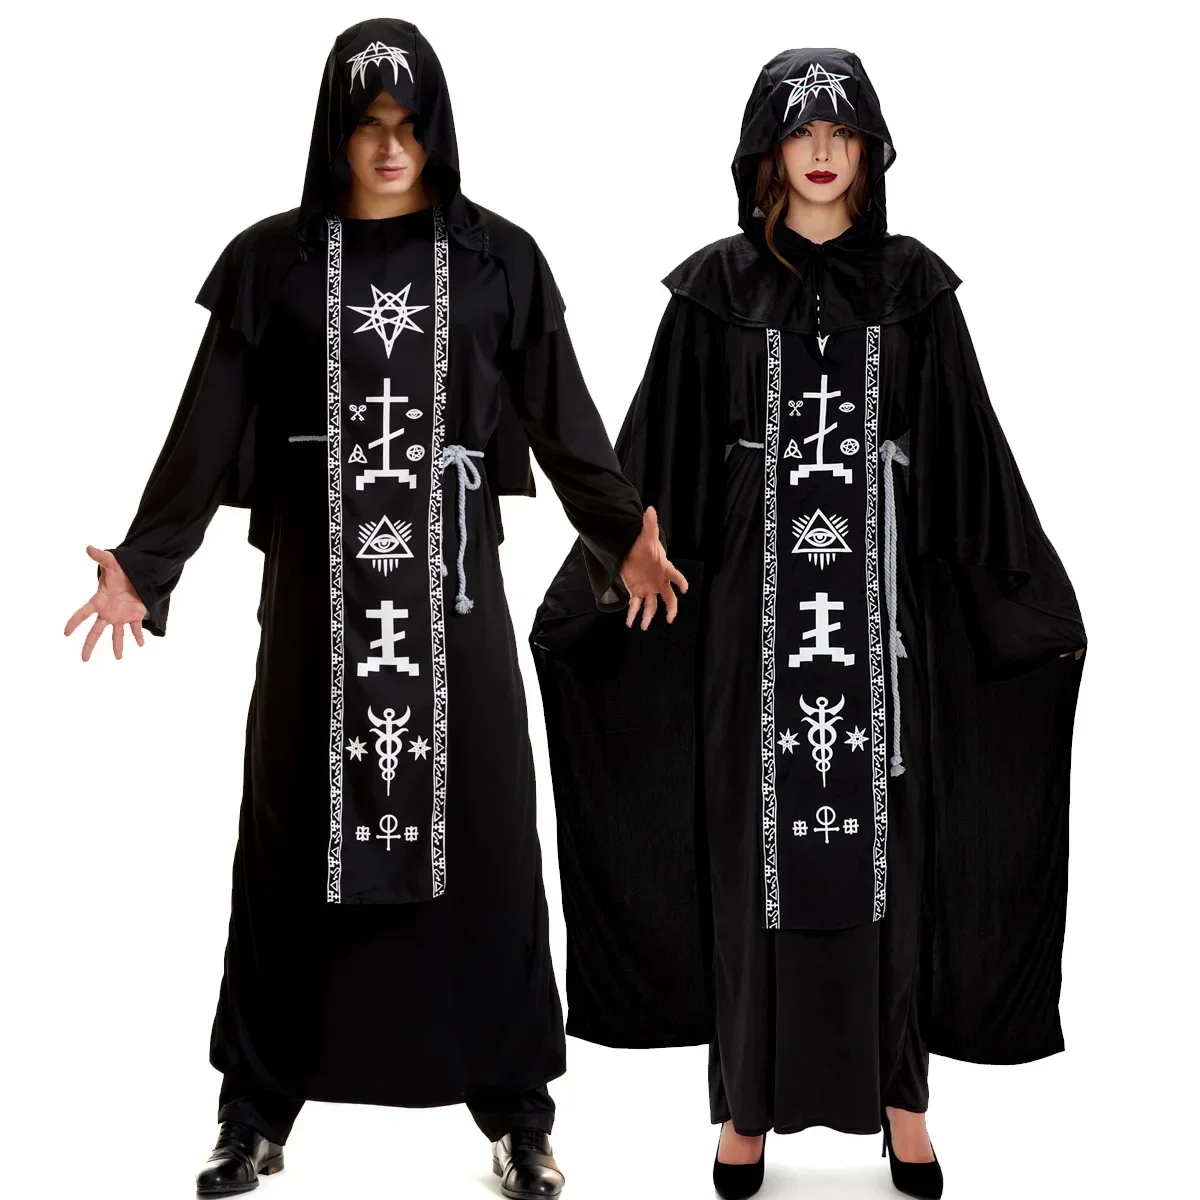 

Adult Medieval Magician Robe Cosplay Costume for Men Women Black Hooded Scary Witch Devil Role Play Costume For Halloween Party